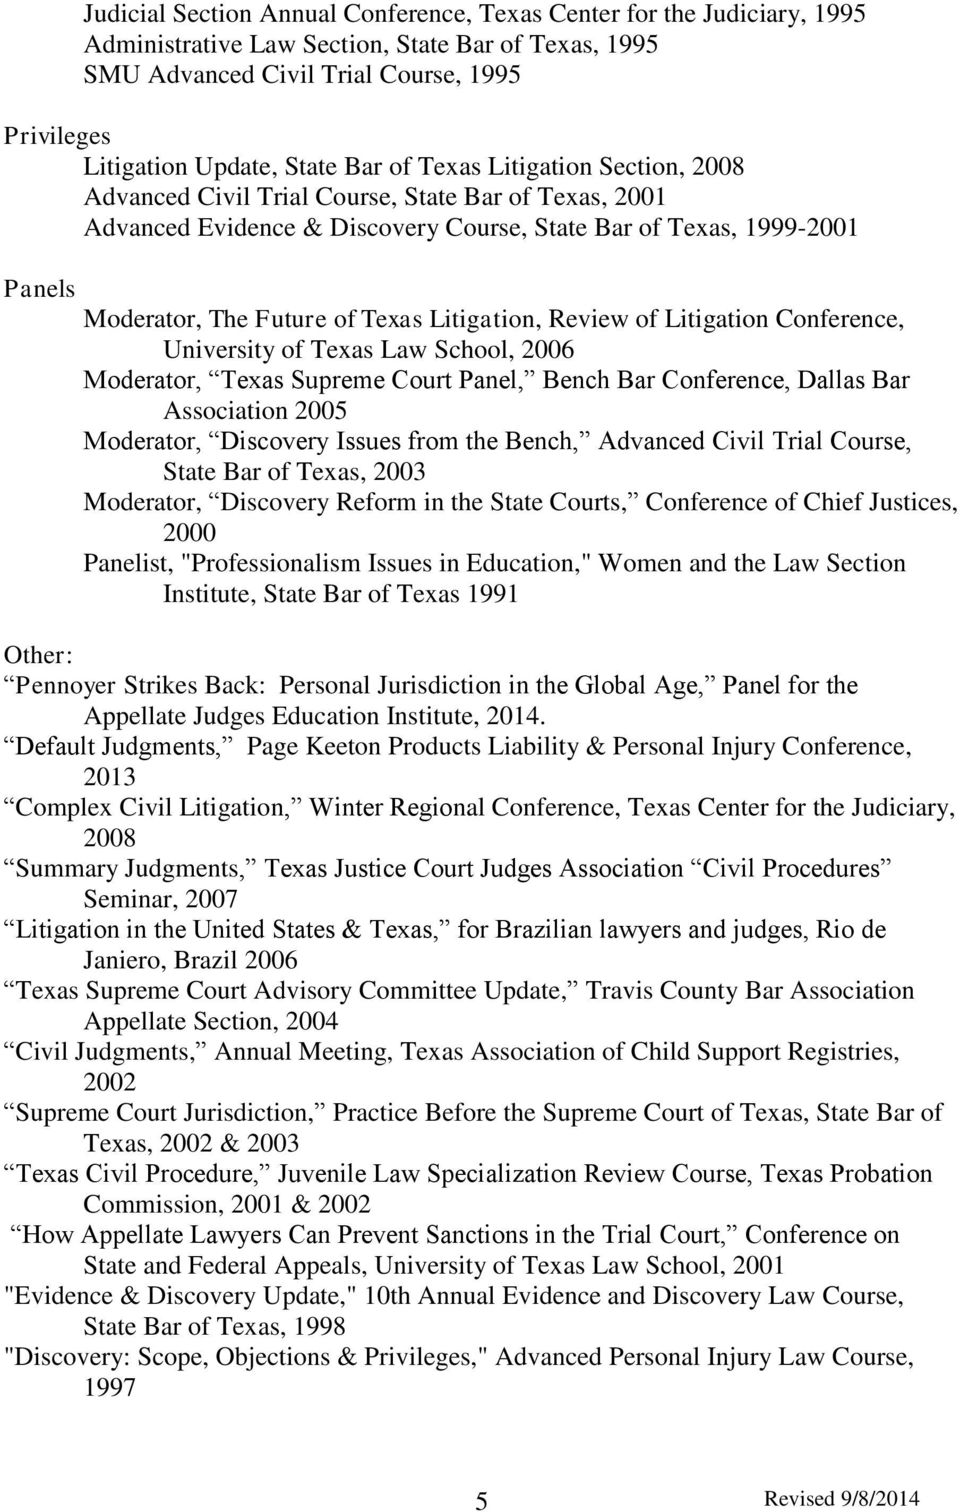 Litigation, Review of Litigation Conference, University of Texas Law School, 2006 Moderator, Texas Supreme Court Panel, Bench Bar Conference, Dallas Bar Association 2005 Moderator, Discovery Issues